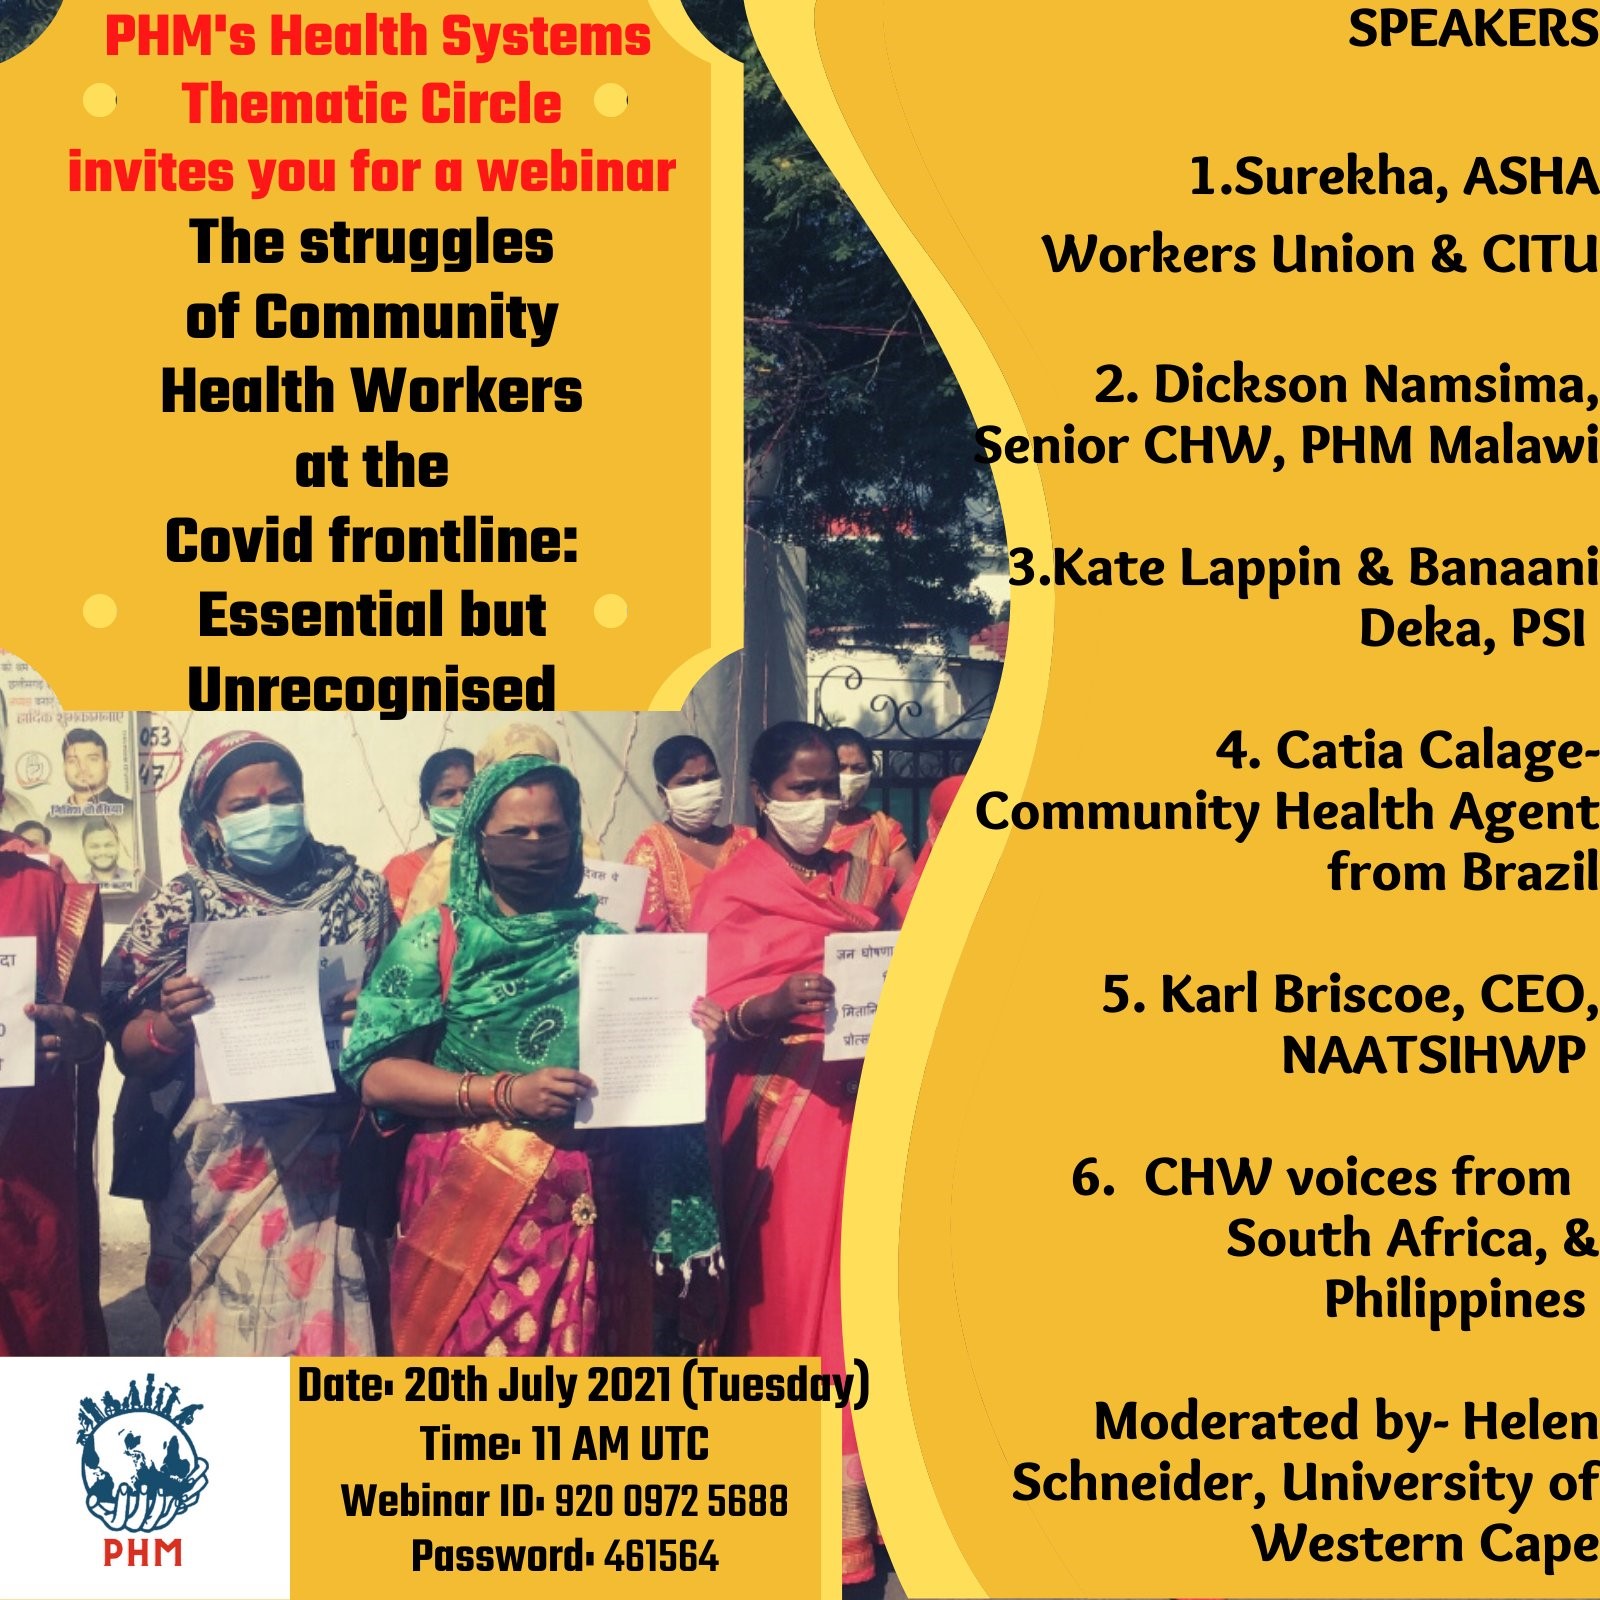 People’s Health Movement (PHM) Health Systems Thematic Circle hosted the webinar on “The struggles of Community Health Workers at the Covid frontline: Essential but Unrecognised” on 20 July 2021.